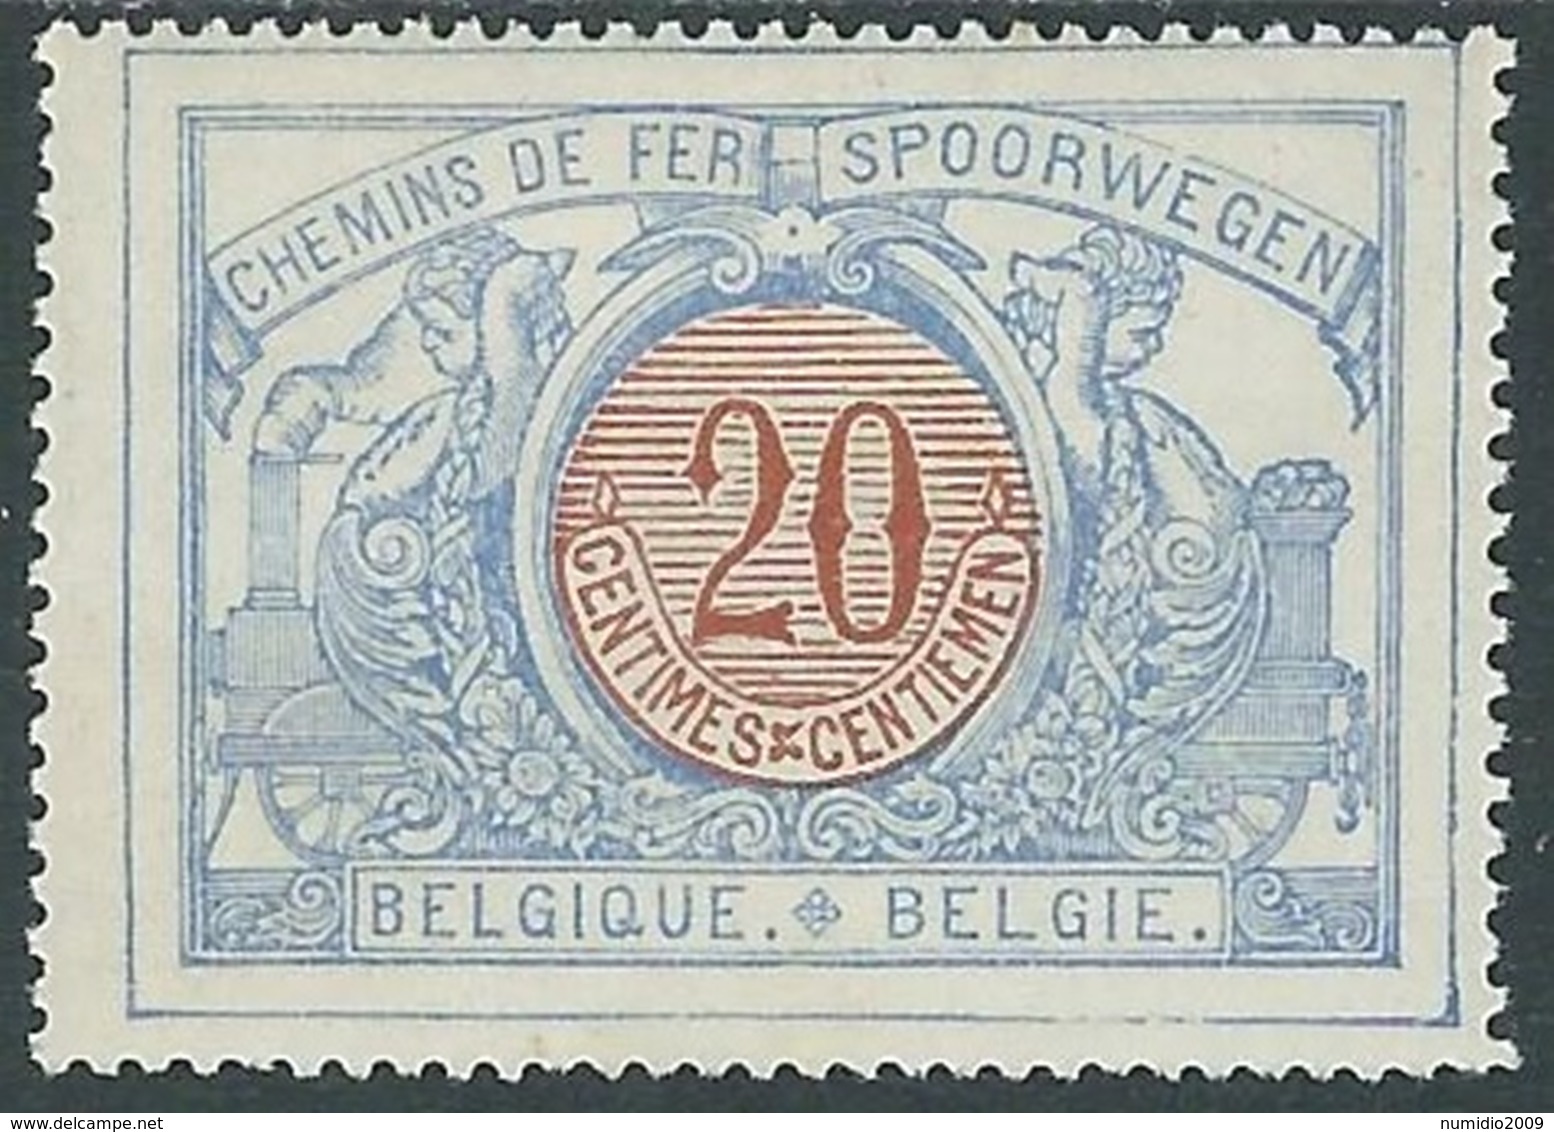 1902-05 BELGIO PACCHI POSTALI 20 CENT MH * - RB13-9 - Bagages [BA]